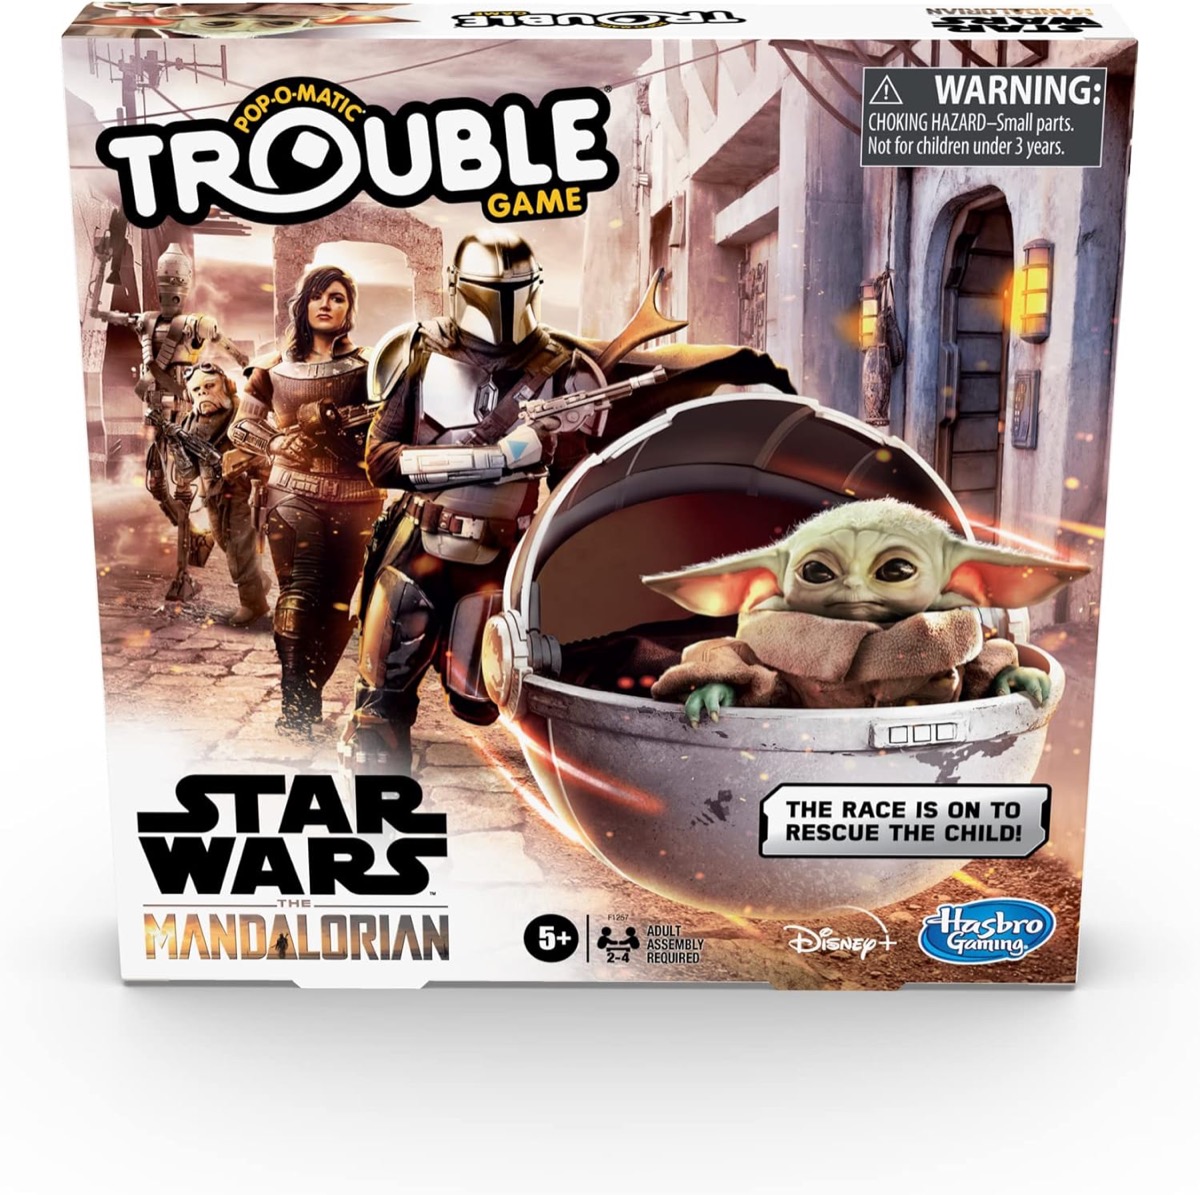 Box art for Trouble- Star Wars The Mandalorian Edition featuring The Child being chased by Mando and a comrade 